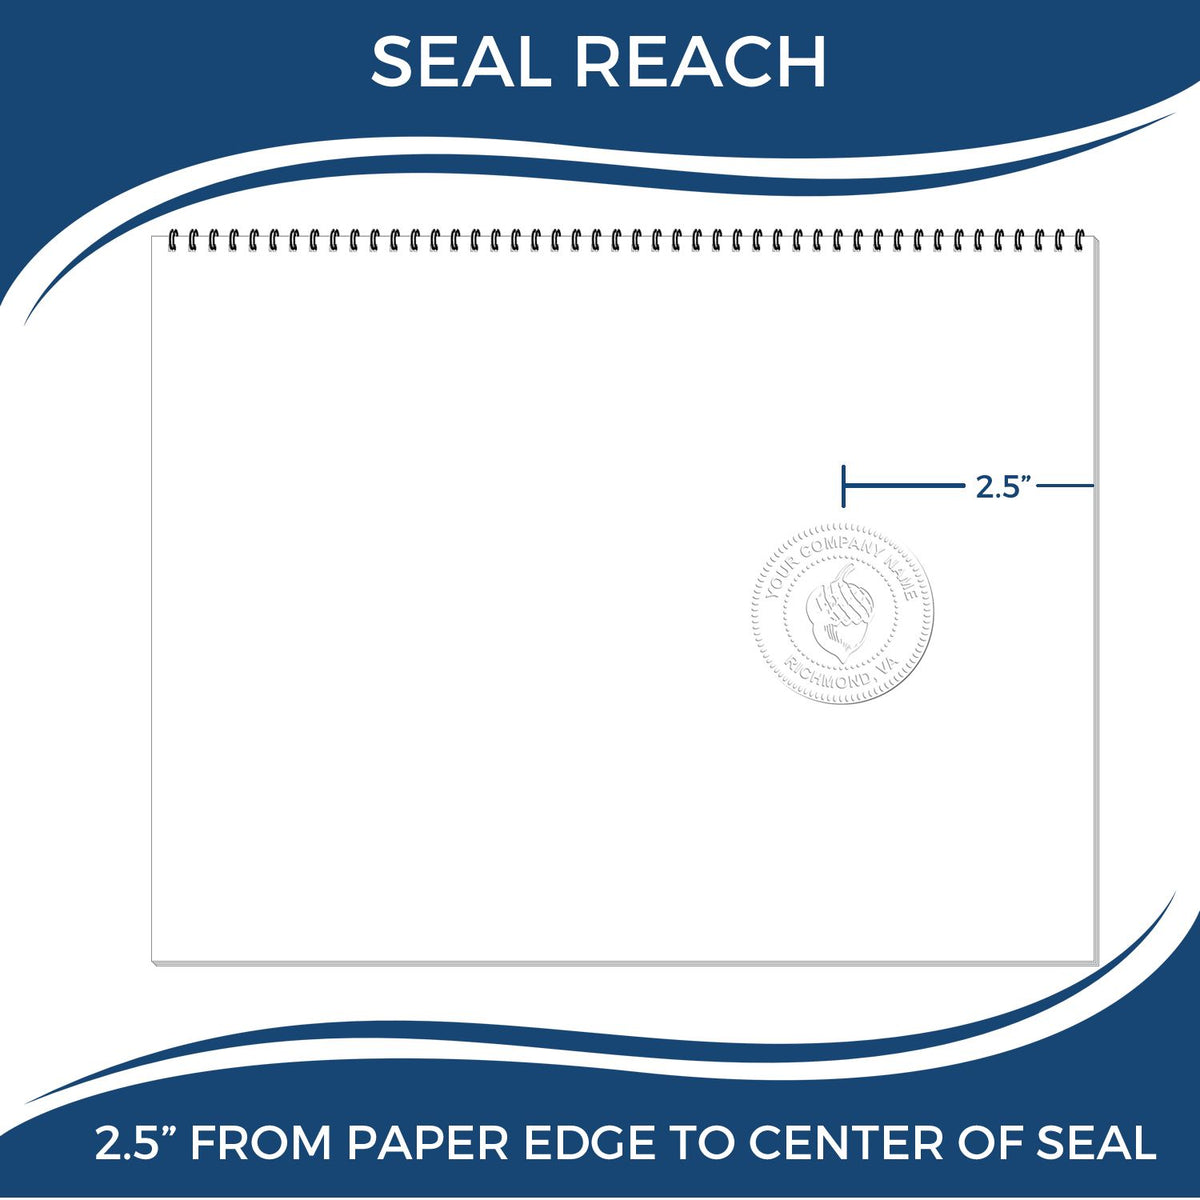 An infographic showing the seal reach which is represented by a ruler and a miniature seal image of the Long Reach Idaho PE Seal